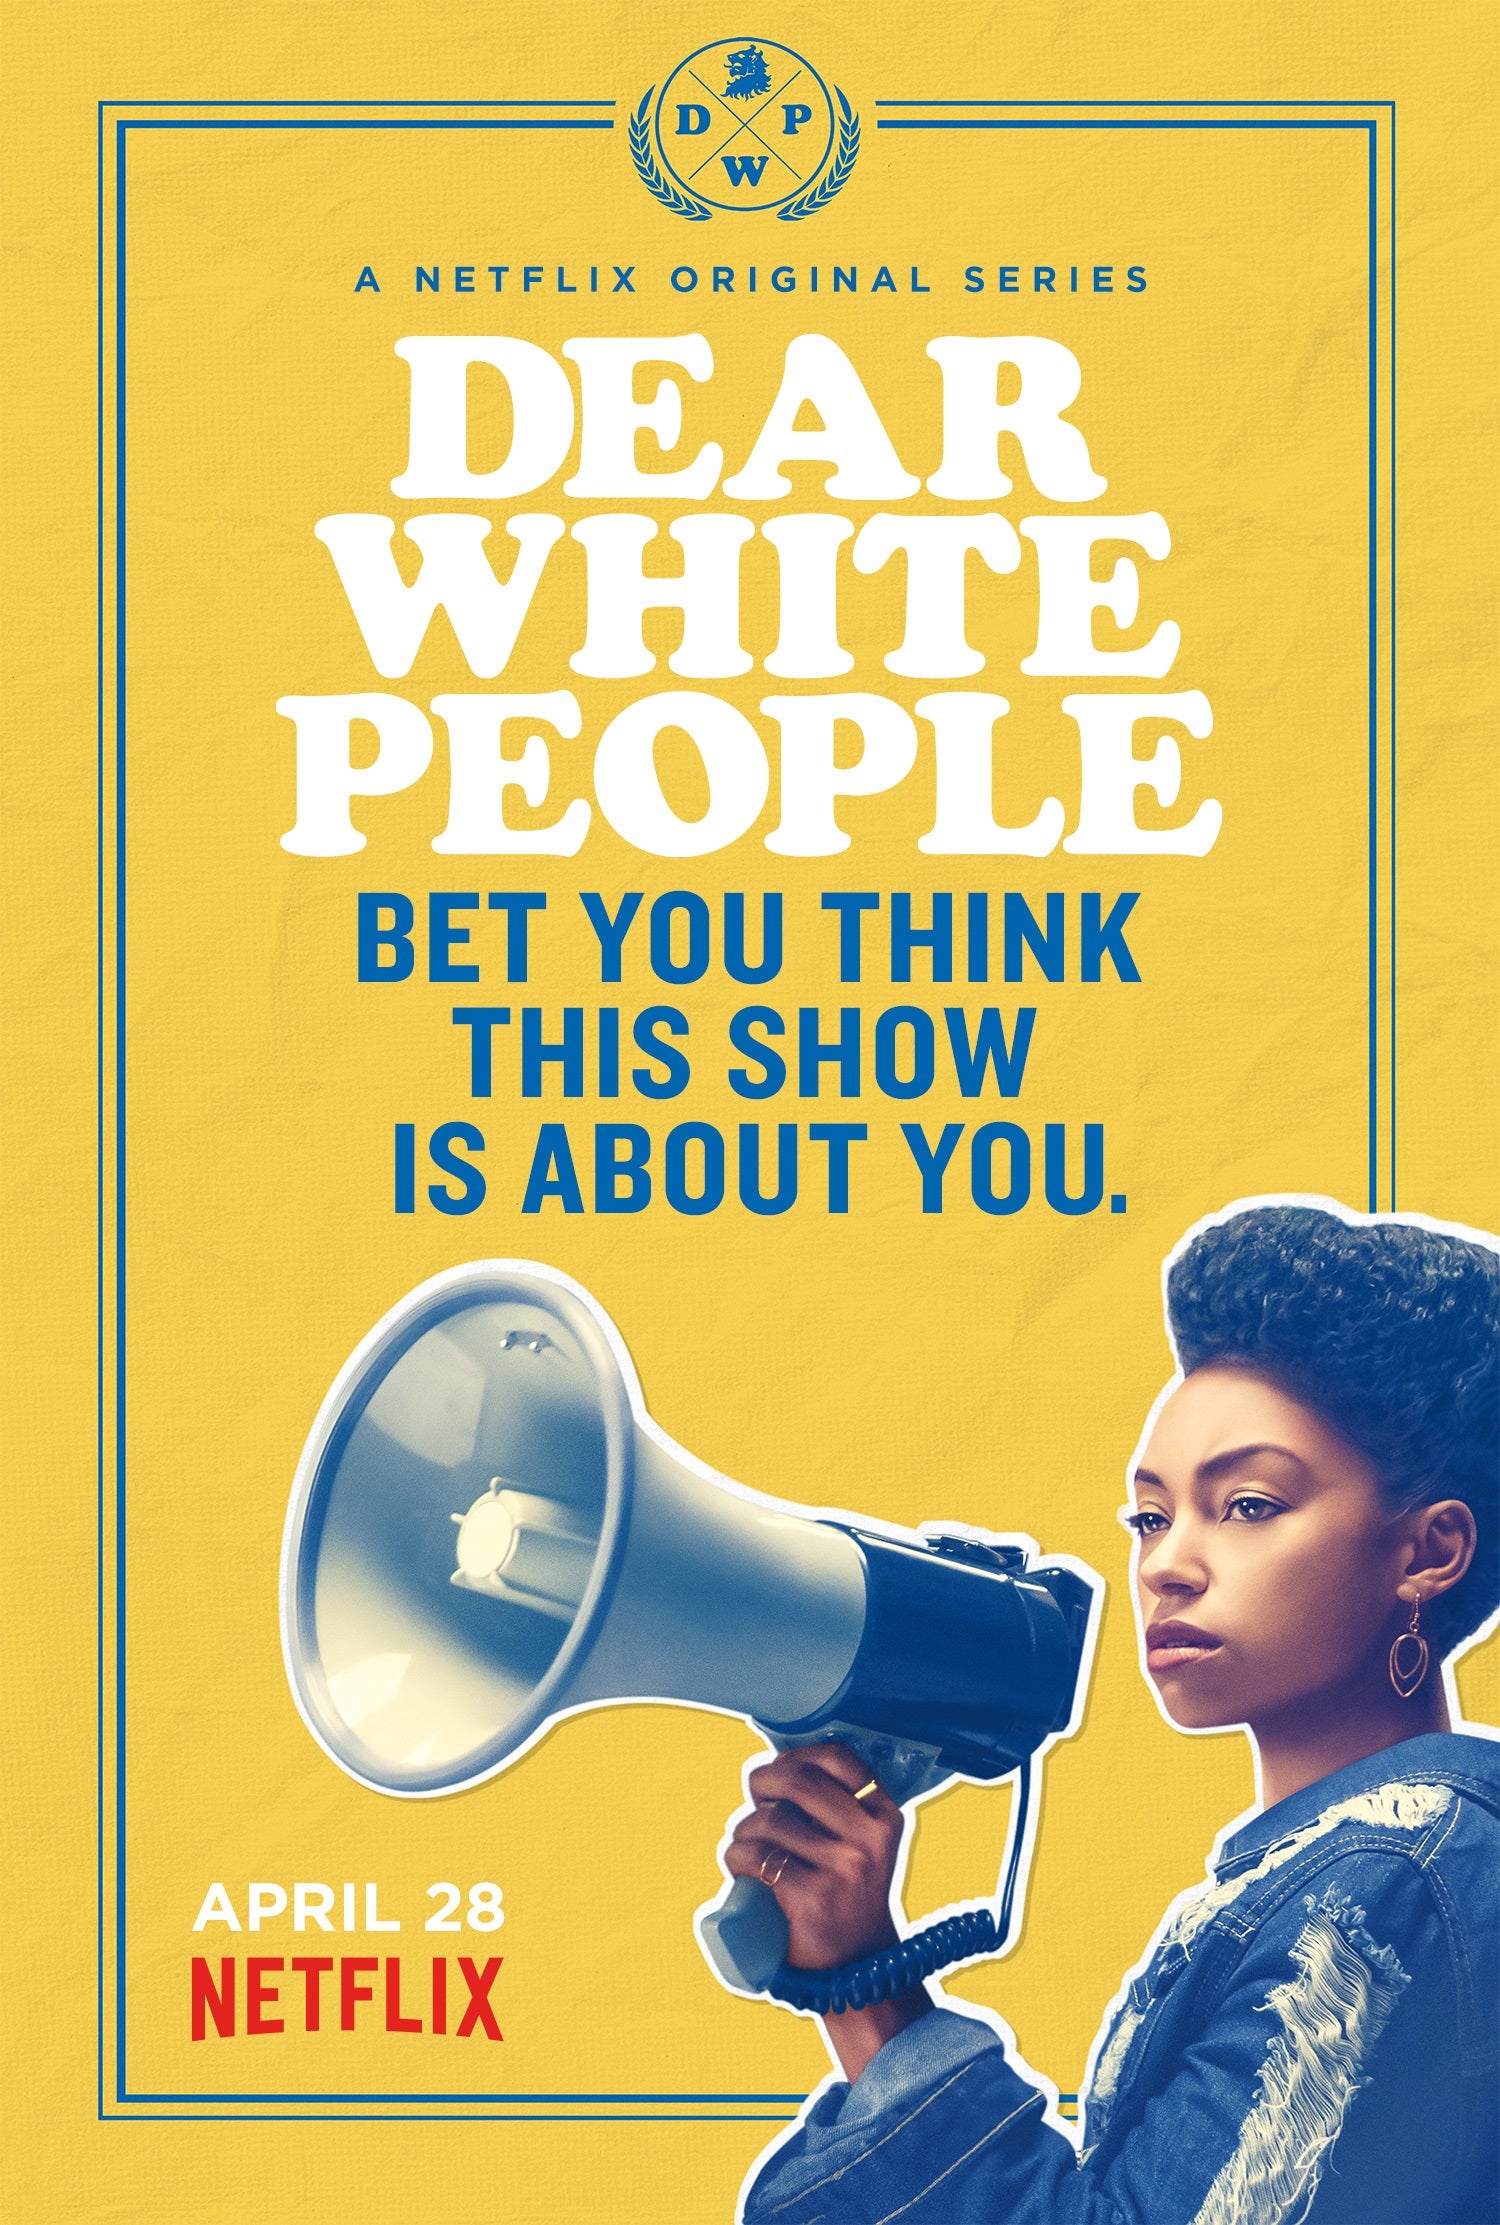 WATCH: The Trailer For ‘Dear White People’ Is Proof That Netflix Might Have Another Hit On Their Hands